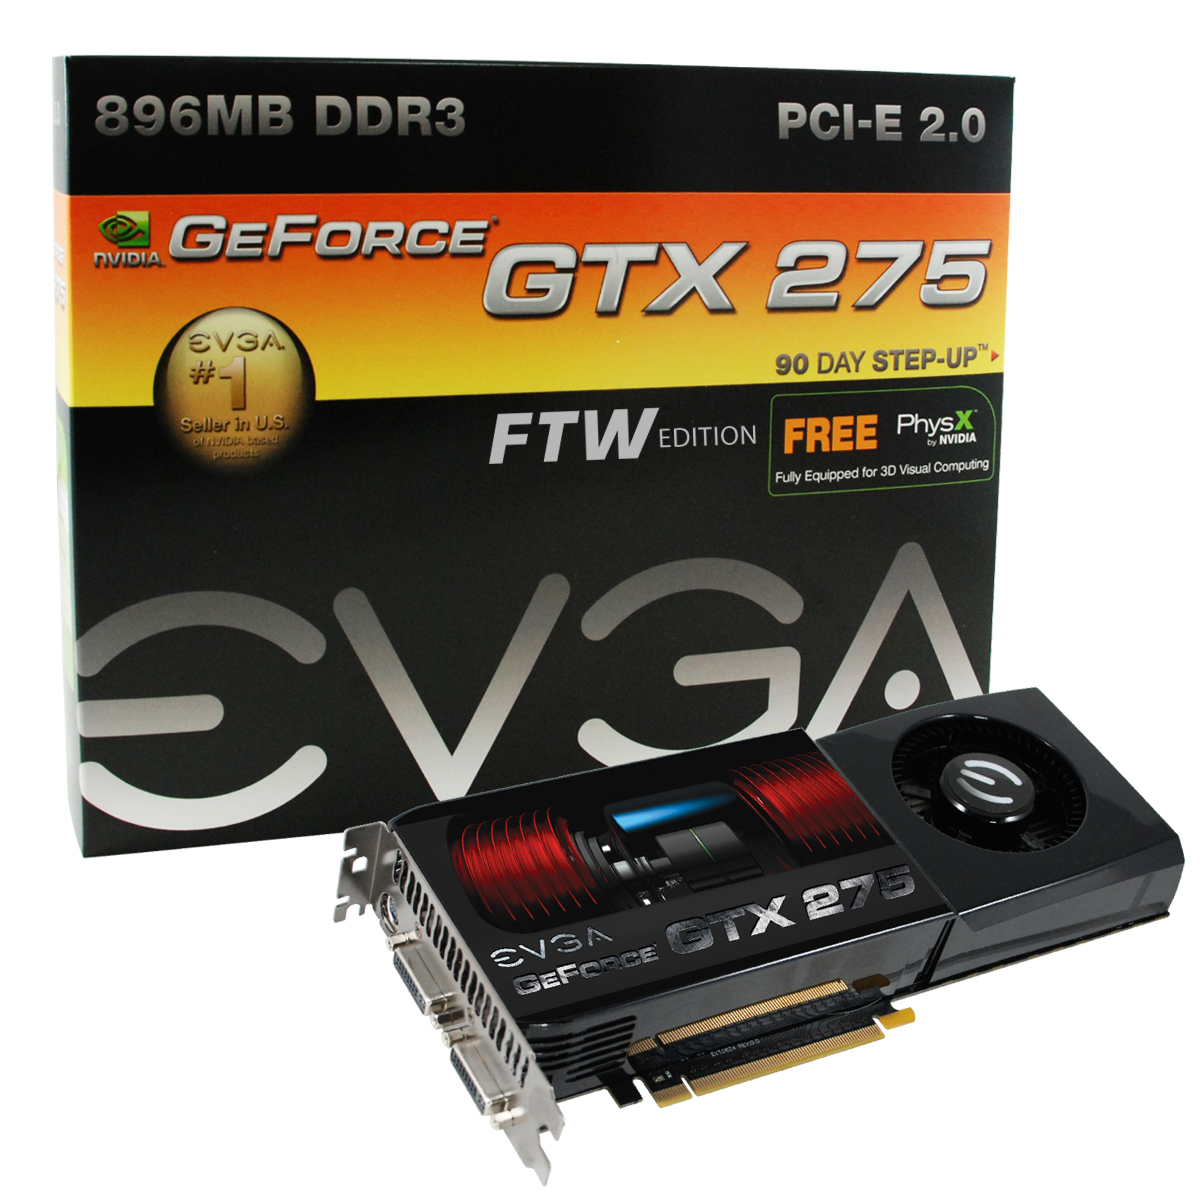 Media asset in full size related to 3dfxzone.it news item entitled as follows: EVGA lancia la  GeForce GTX 275 FTW Edition (OC by factory) | Image Name: news10102_3.jpg